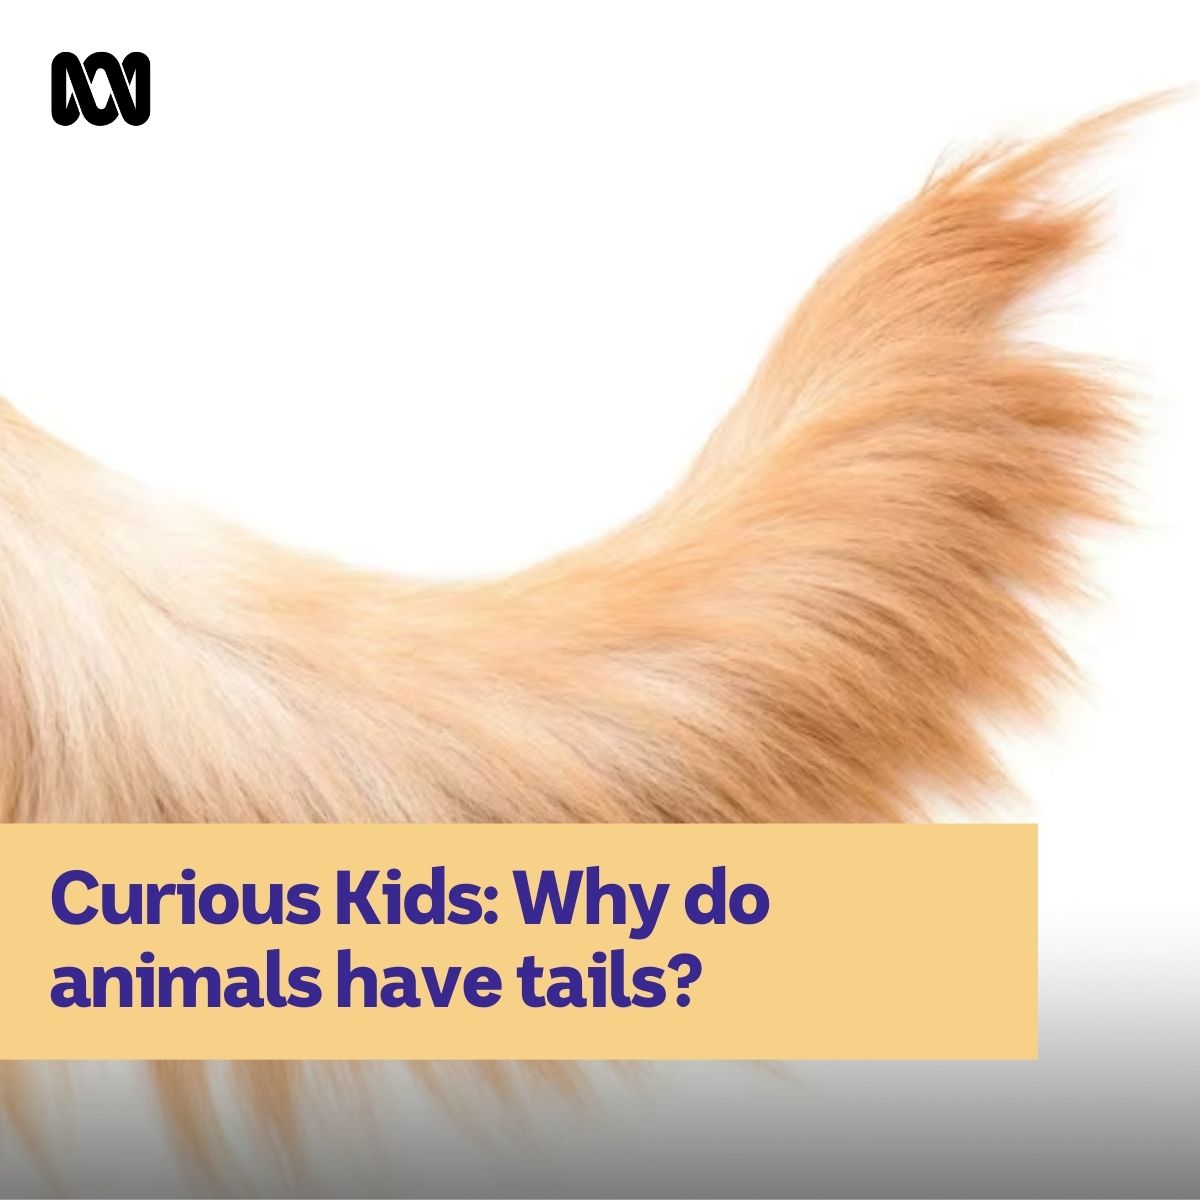 In this article, an expert explains some of the many ways #animals use their #tails, from balancing as they walk to attracting a mate! abc.net.au/education/curi… #CuriousKids